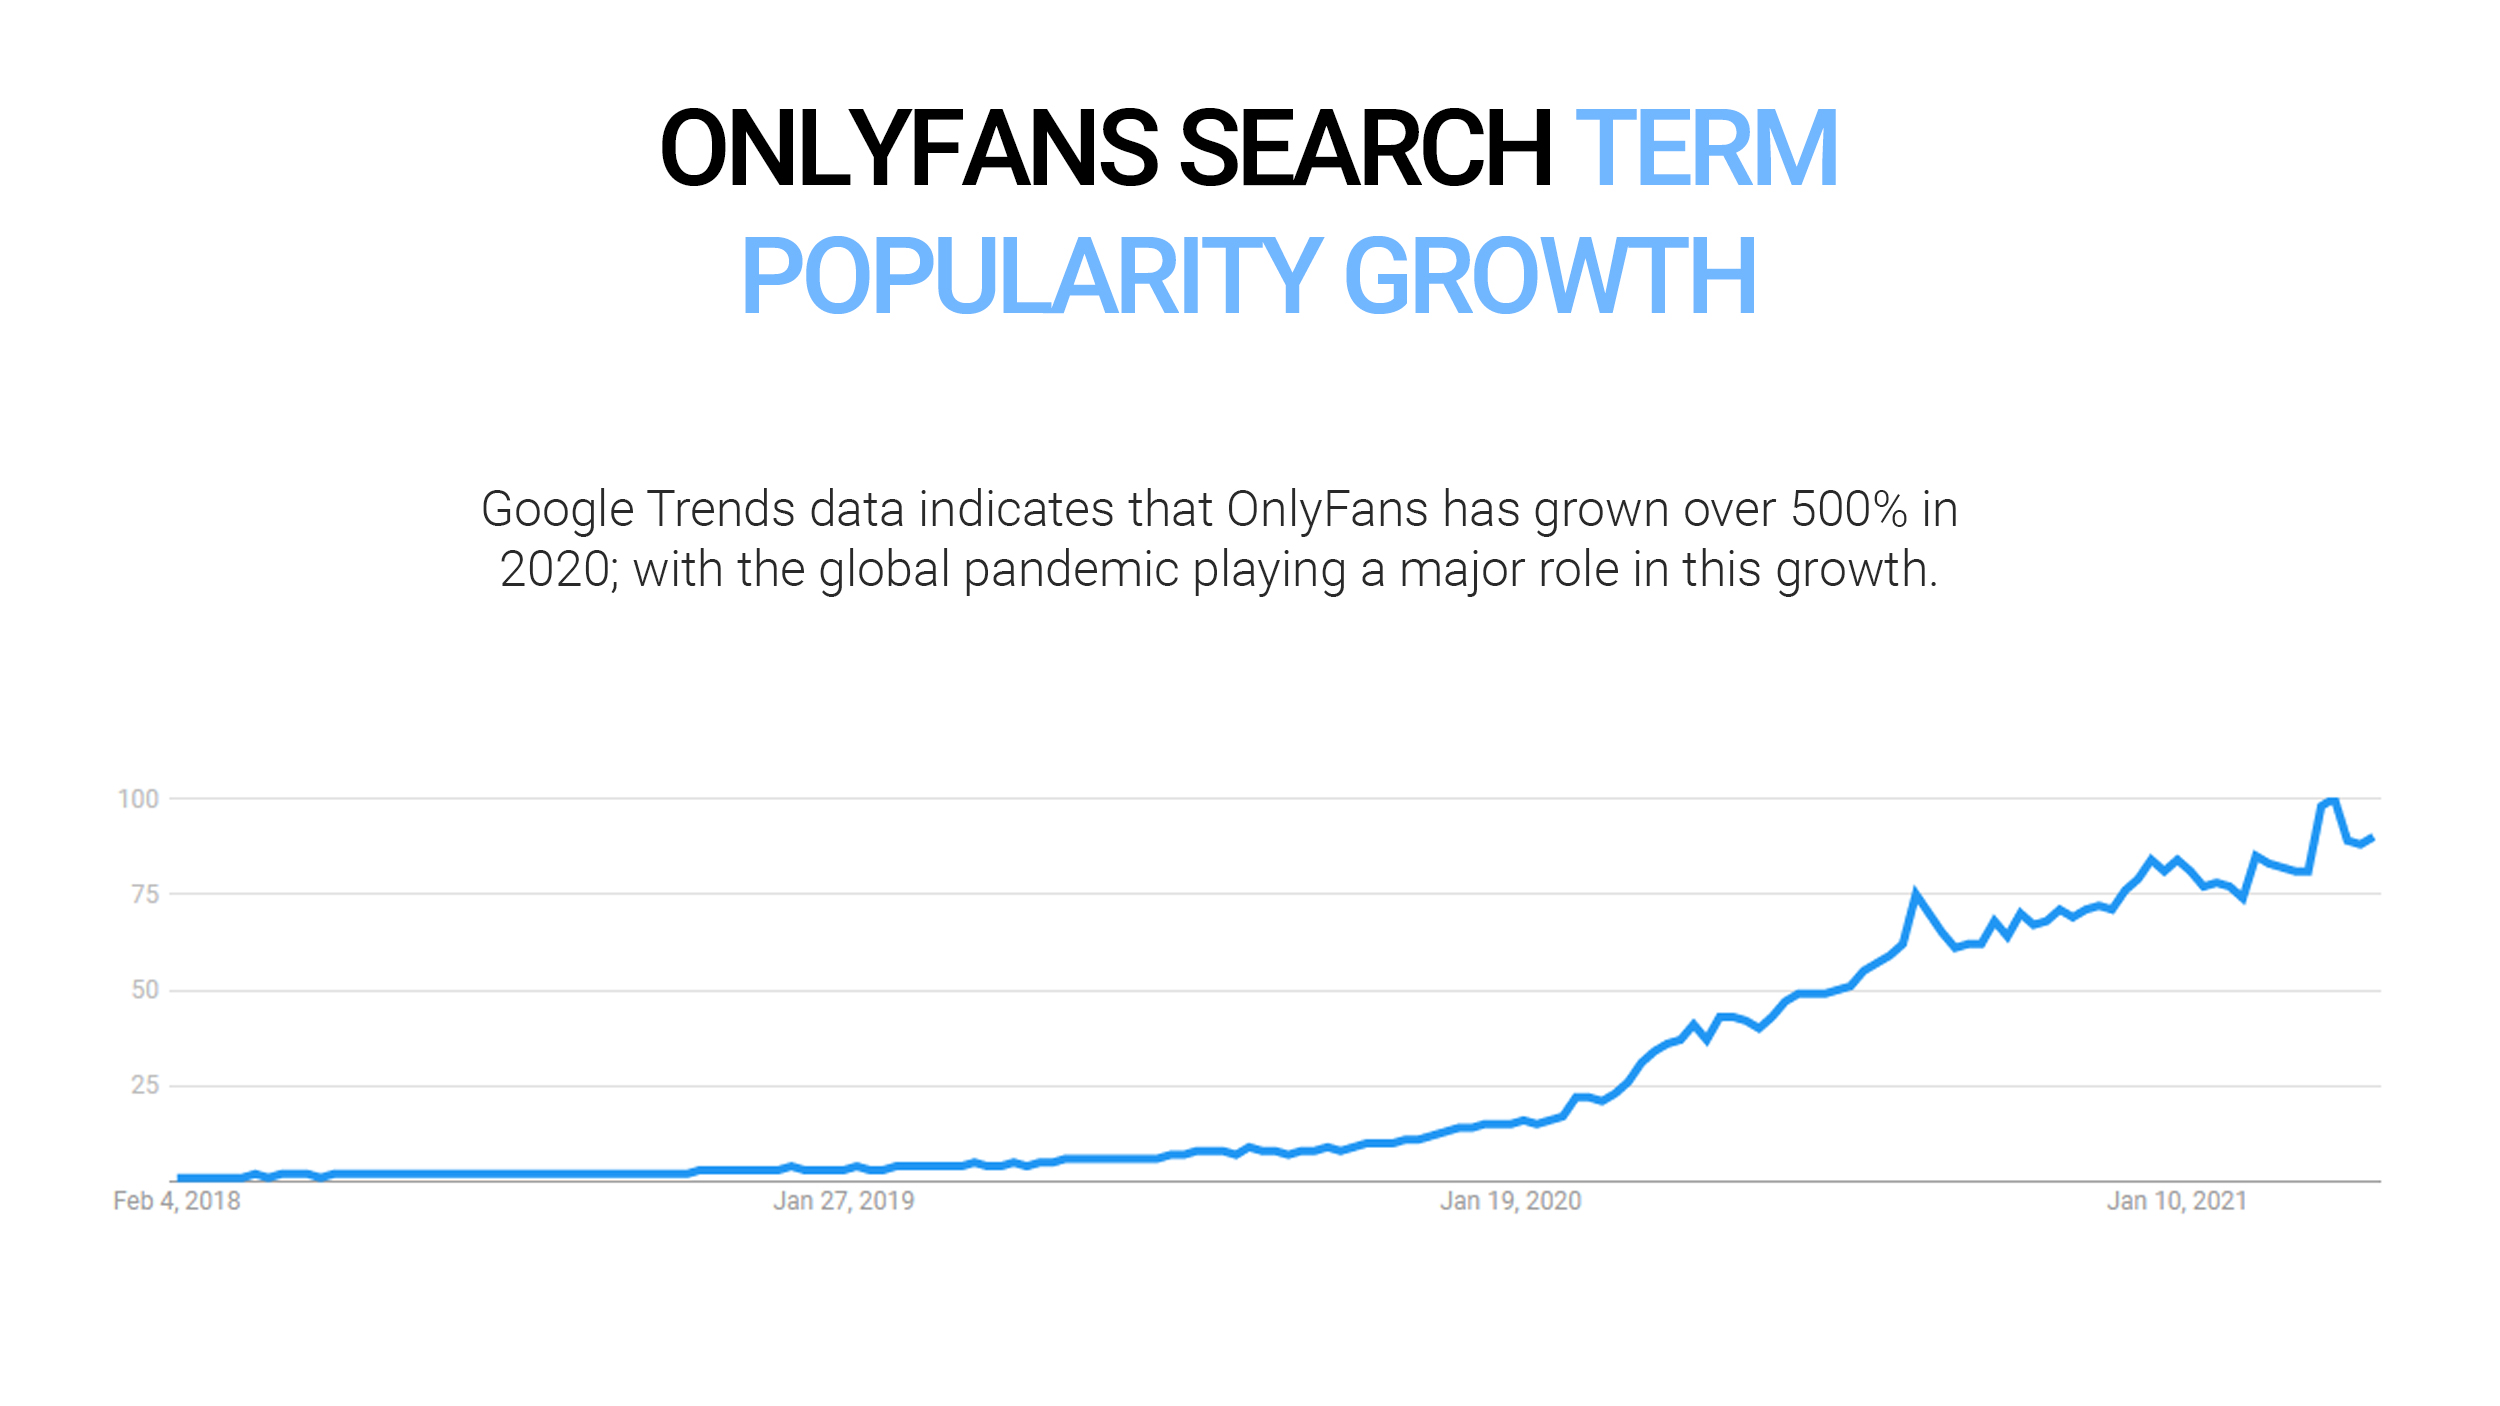 OnlyFans search term popularity growth data from Google Trends